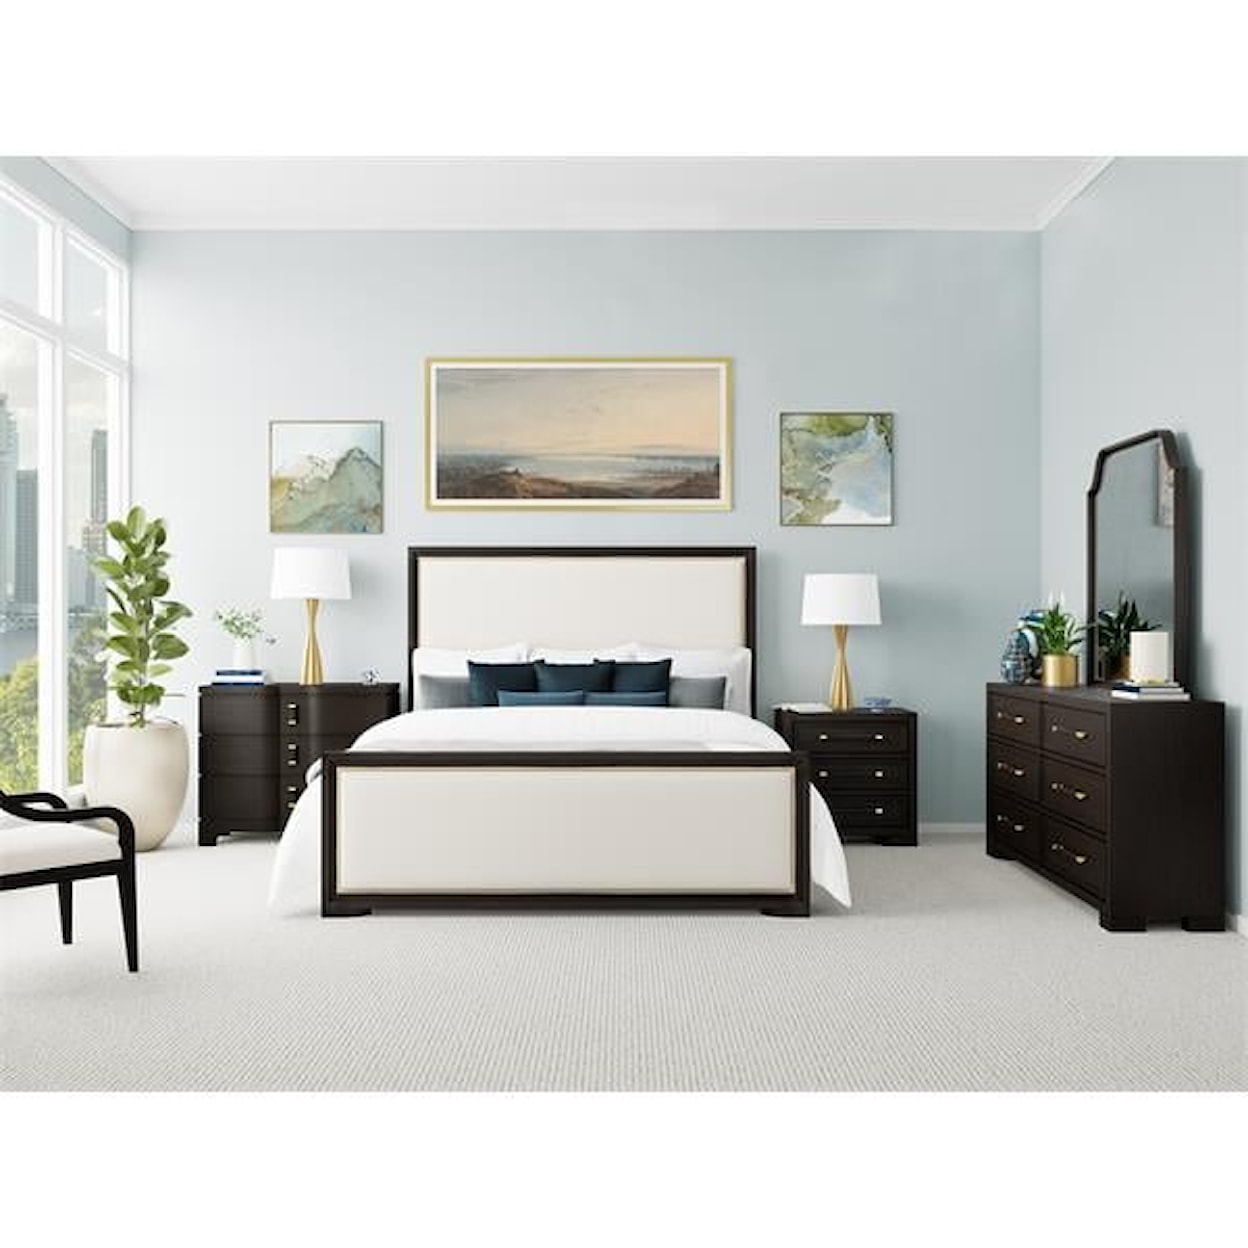 Riverside Furniture Lydia Upholstered Queen Panel Bed